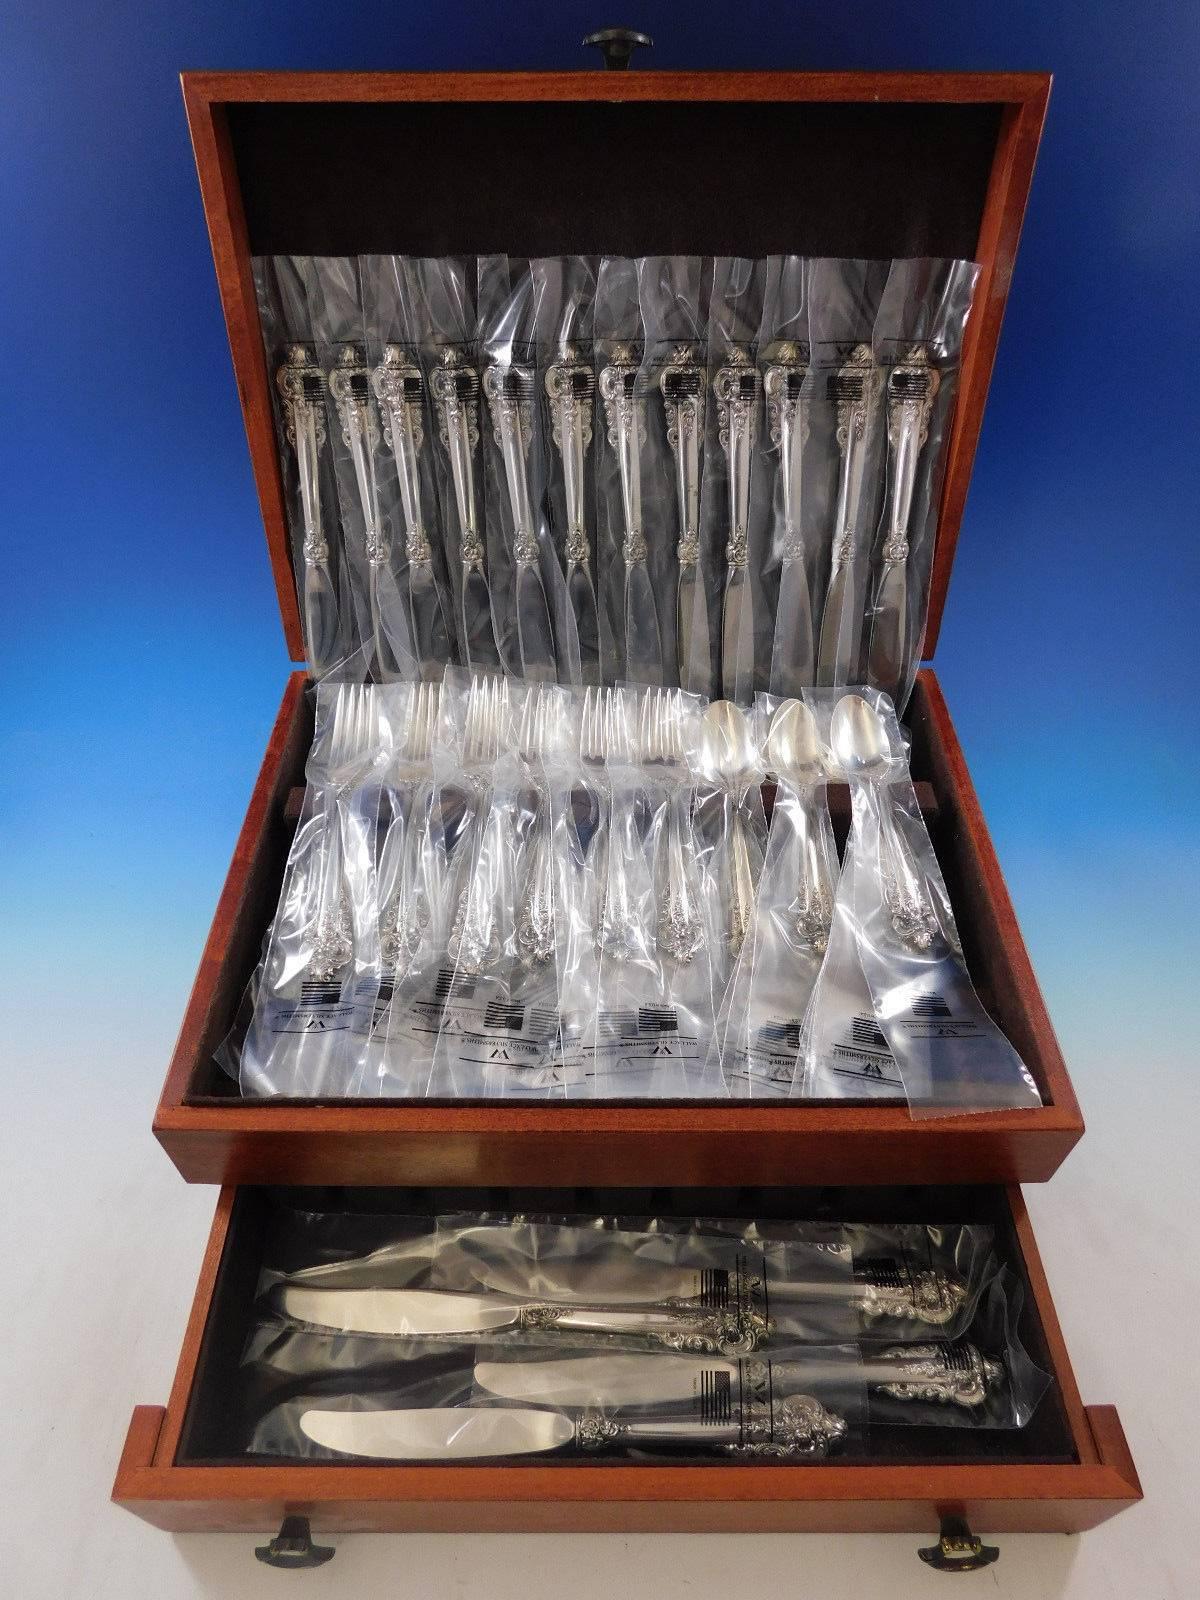 New in factory sleeves Grande Baroque by Wallace sterling silver flatware set - 72 pieces. This set includes:

18 knives, 8 7/8